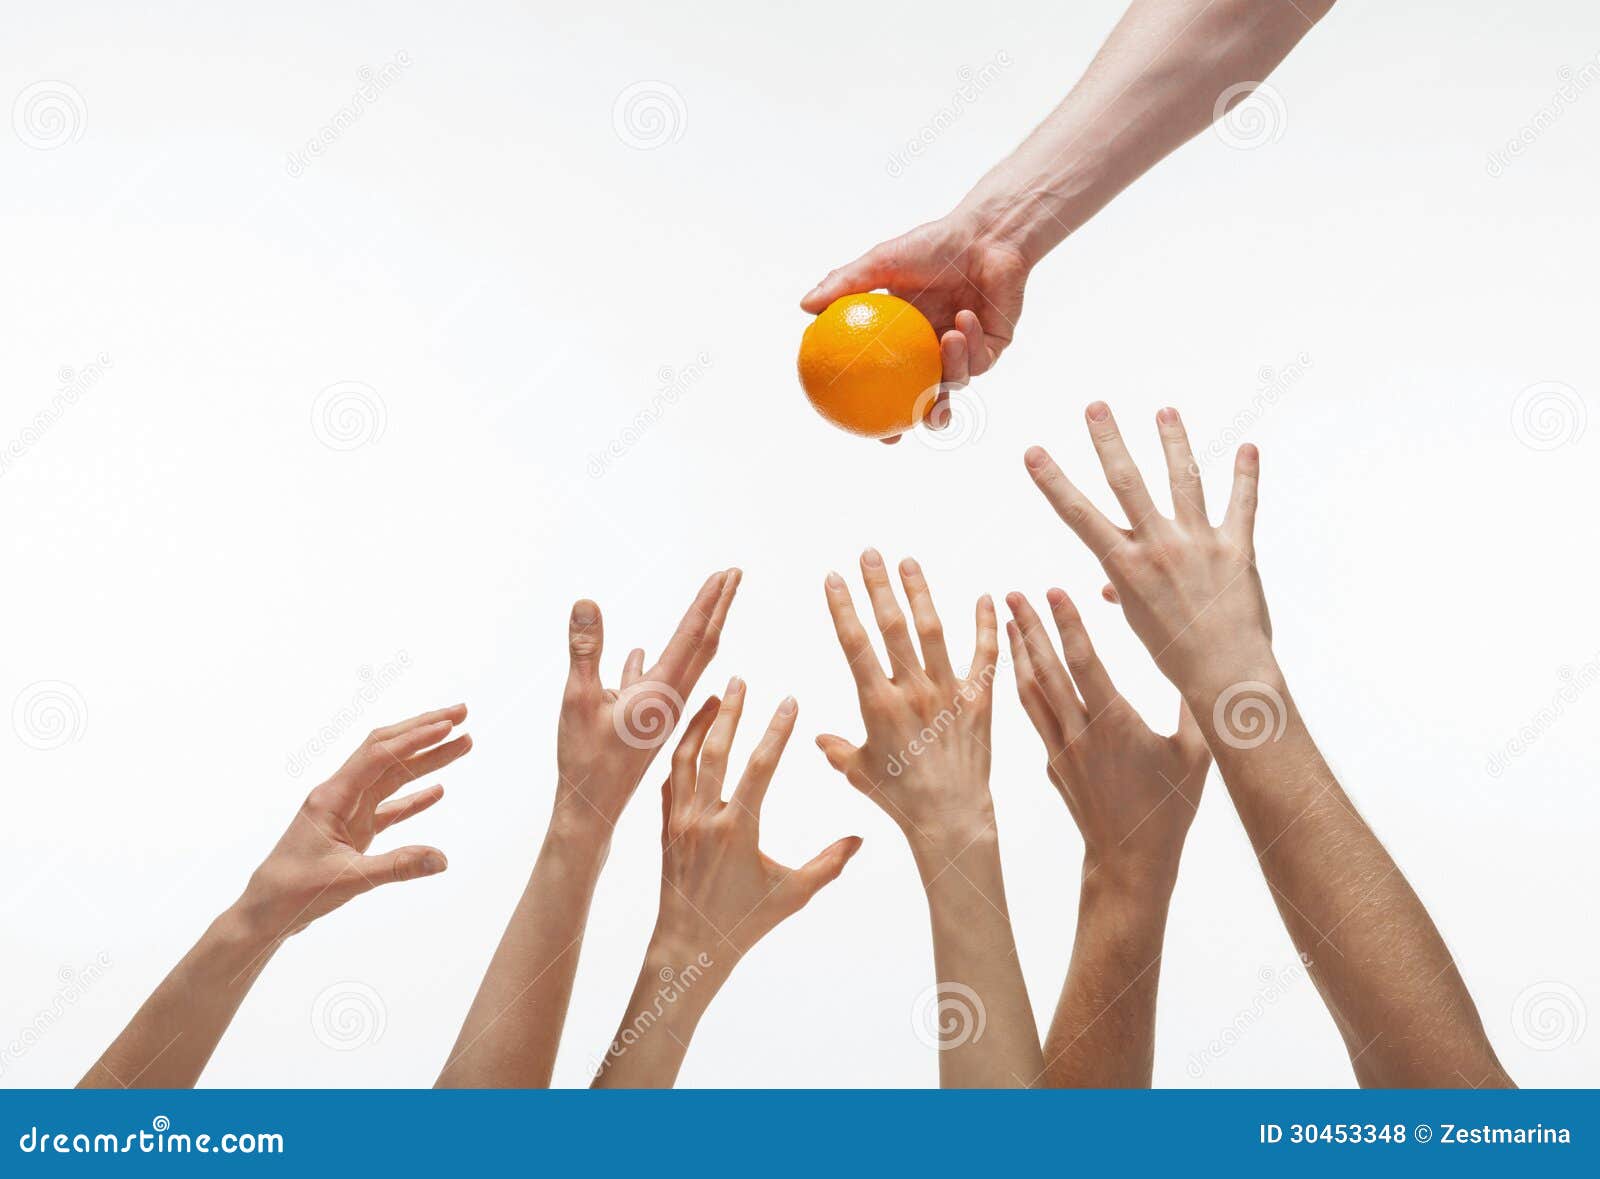 many hands want to get orange